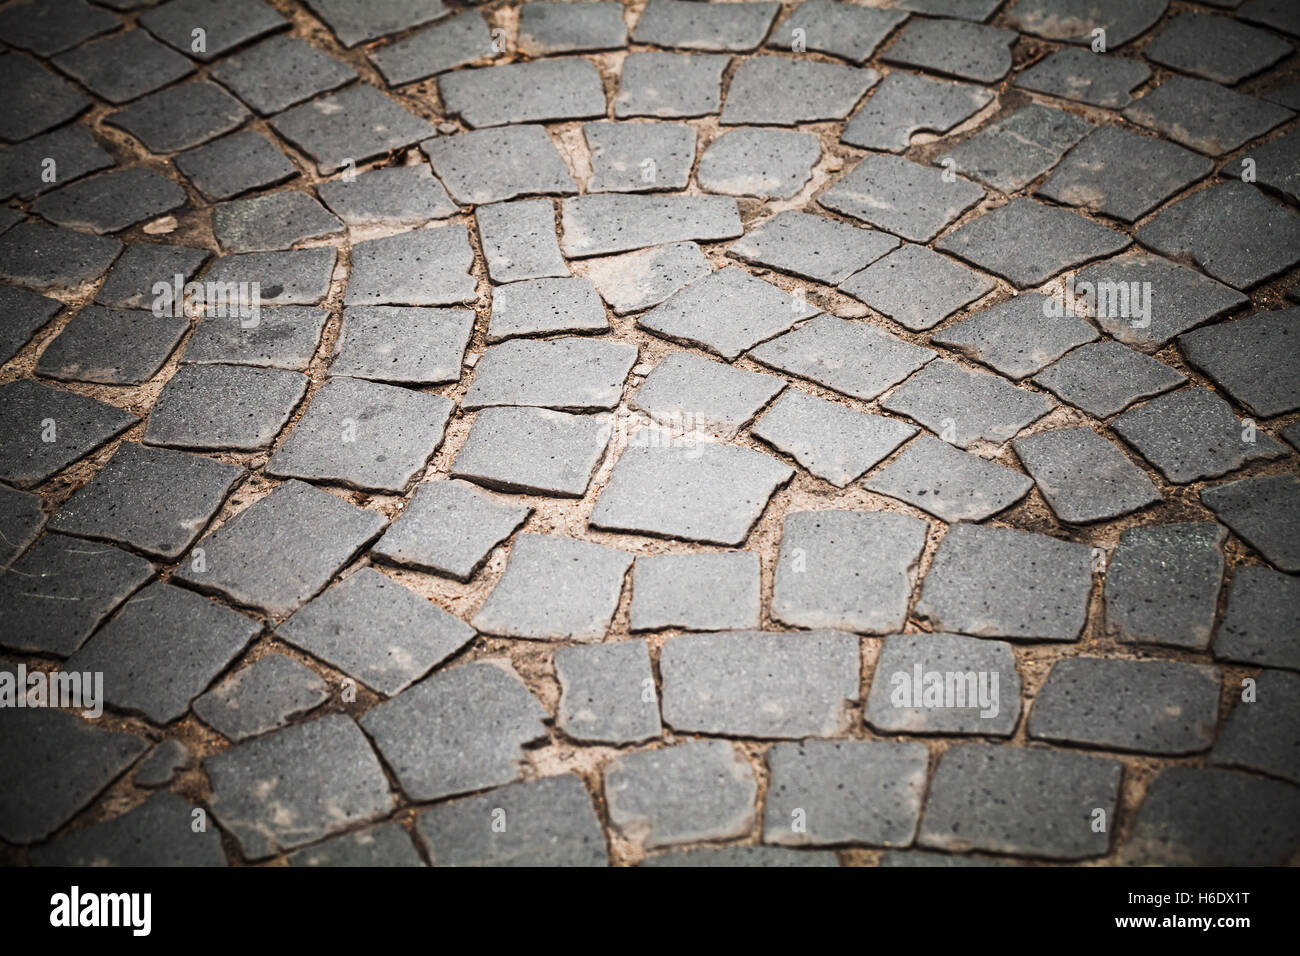 Dark gray cobble road, stone street pavement, background photo with selective focus and vignette effect Stock Photo